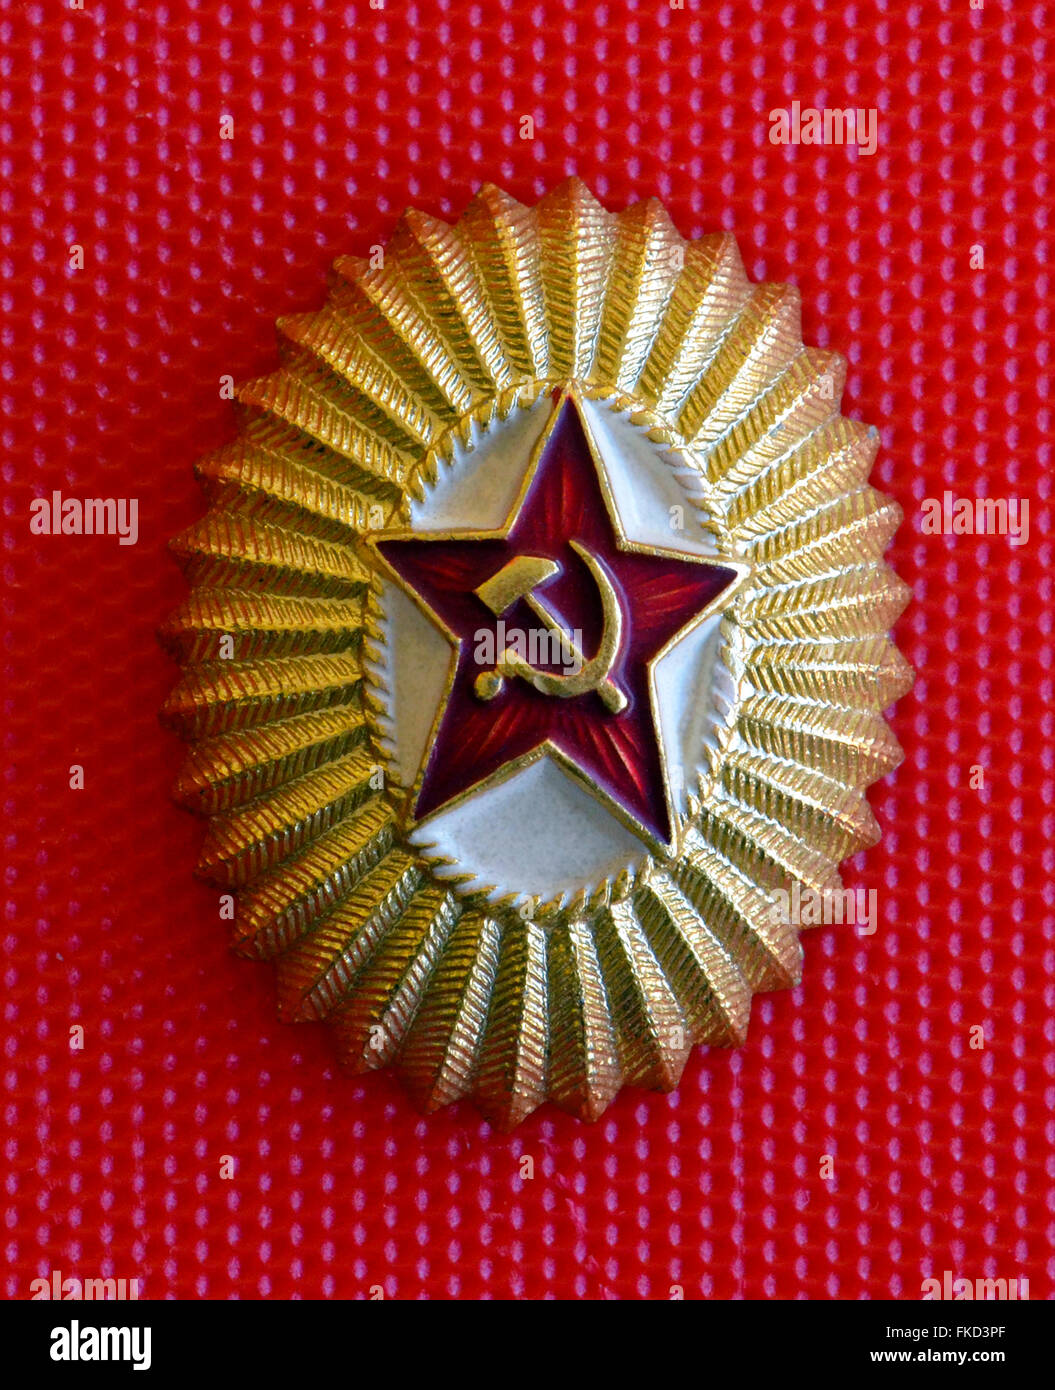 A popular badge of the Soviet Union shows a red star with the hammer and sickle, a Communist symbol created for the Russian Revolution of 1917. It was given to an American visitor in the USSR (Union of the Soviet Socialist Republics) in 1962 during the Cold War. This oval lightweight metal emblem measures 1-3/16 inches in the short dimension by 1-7/16 inches in the long dimension. Stock Photo